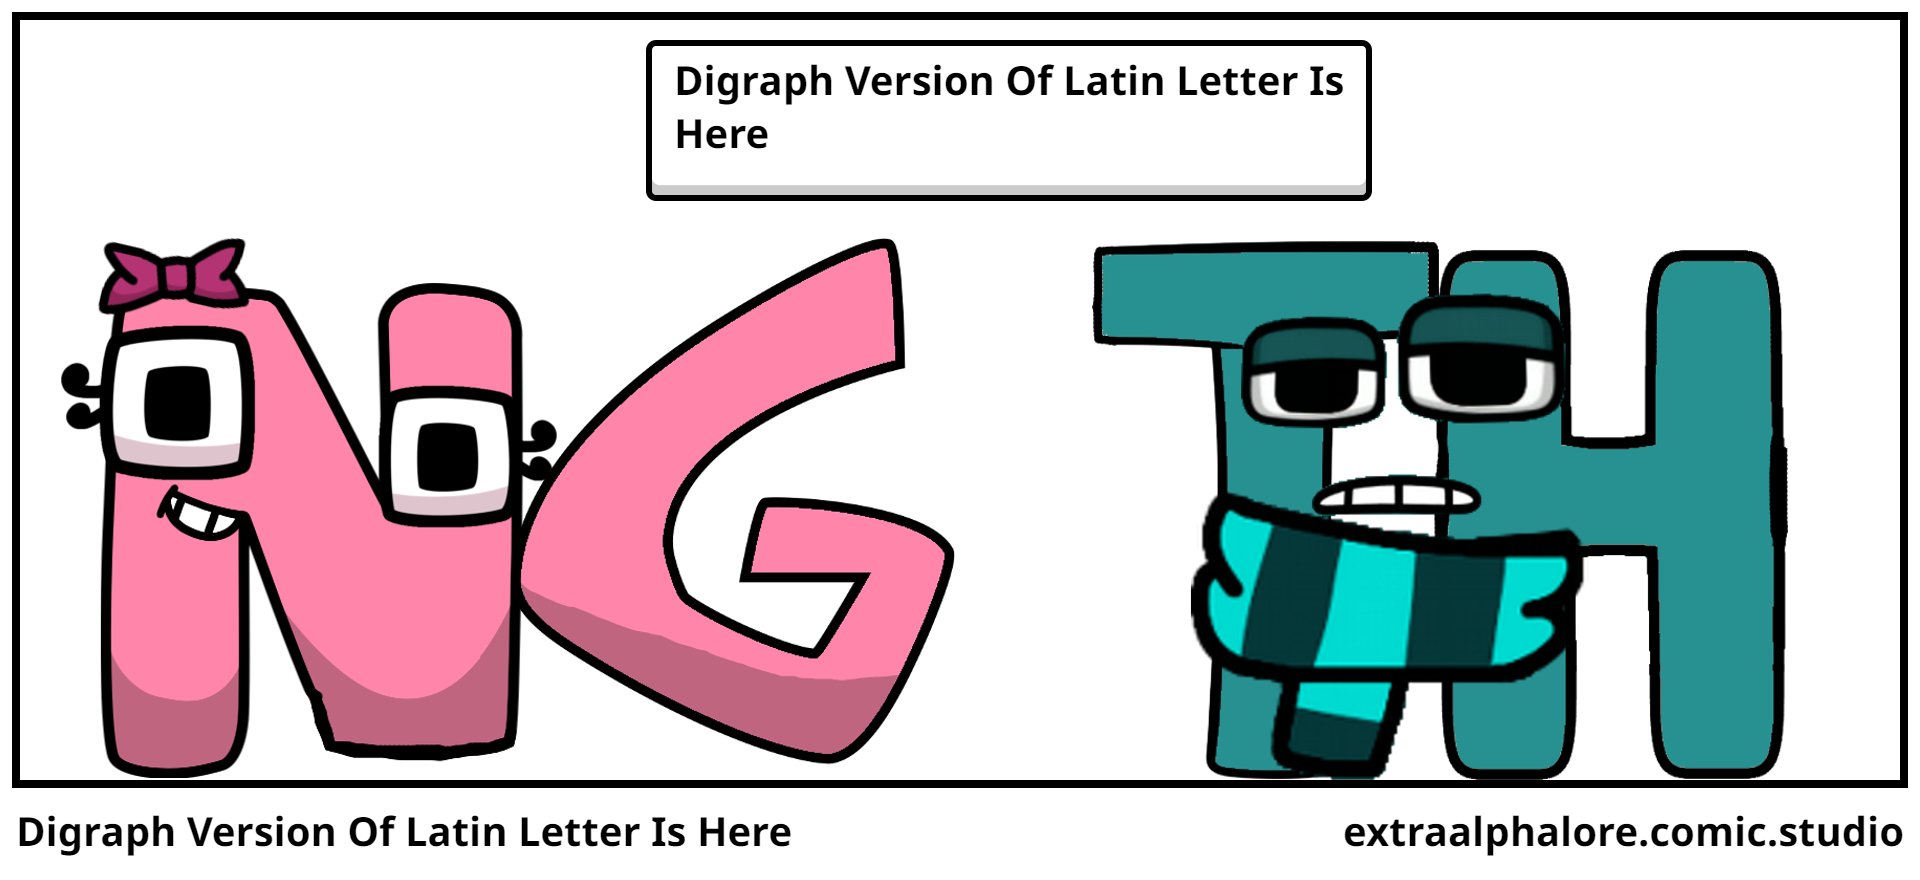 Digraph Version Of Latin Letter Is Here